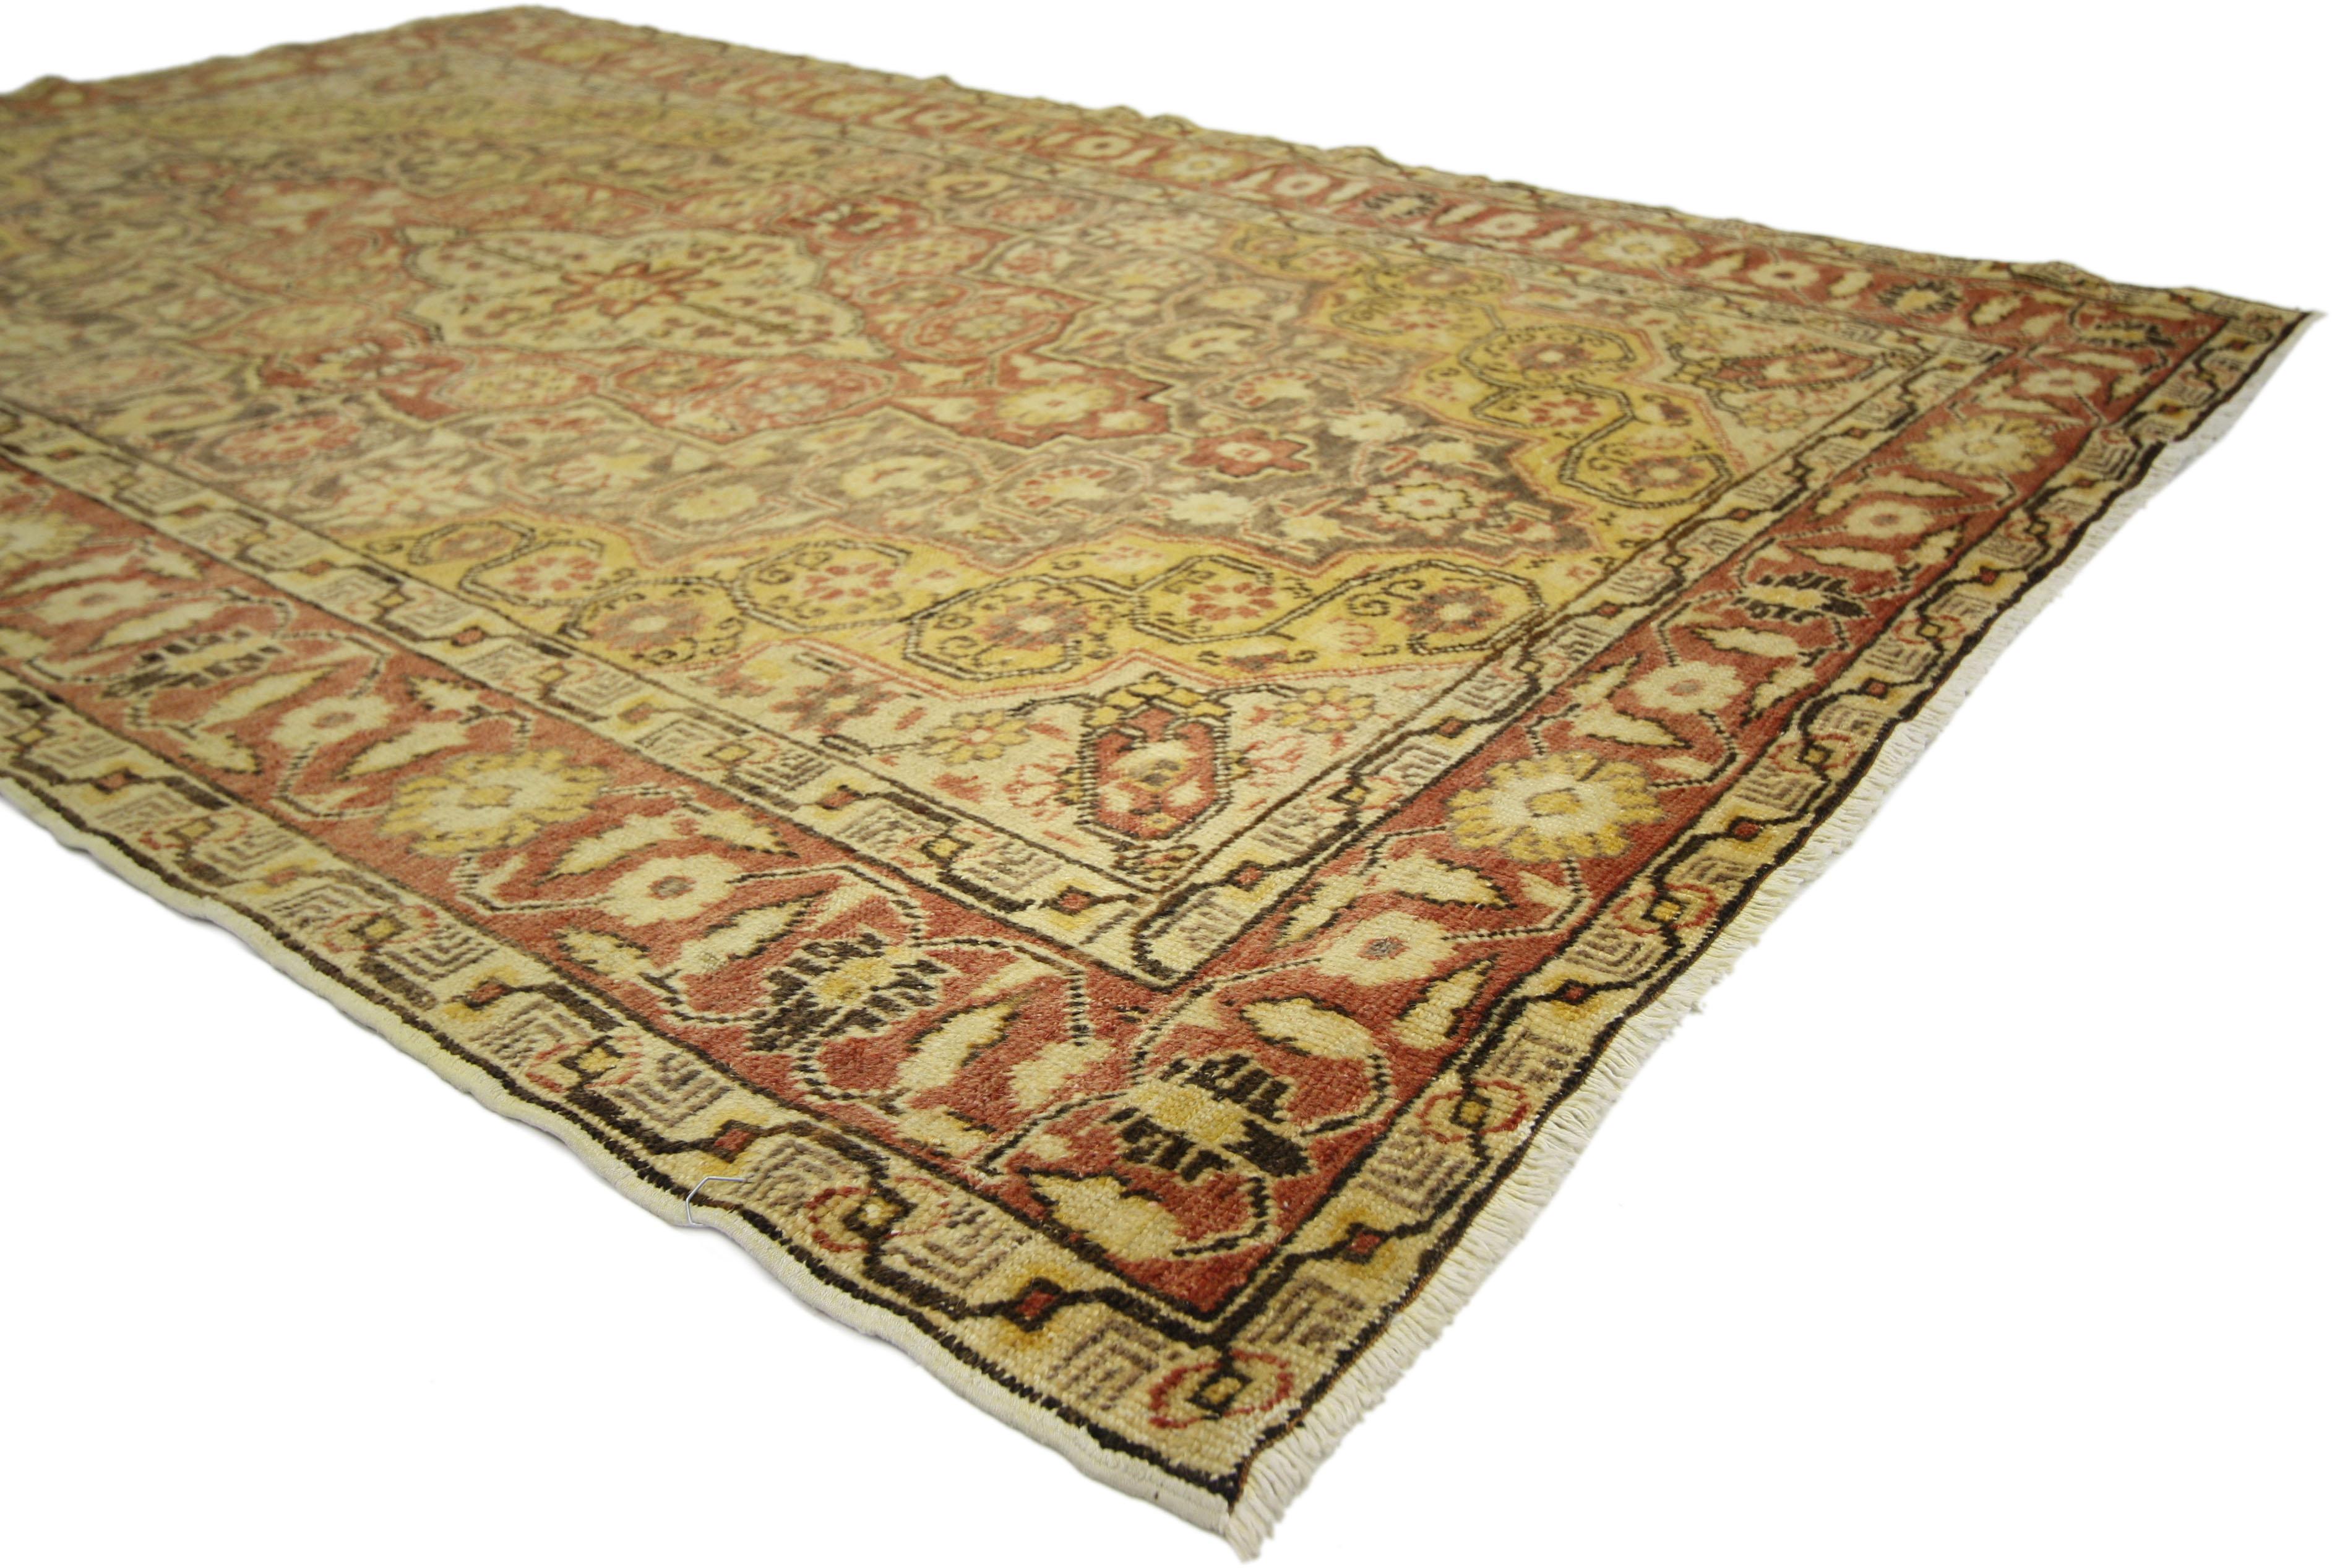 Modern Rustic Style Vintage Turkish Oushak Accent Rug, Entry or Foyer Rug In Good Condition For Sale In Dallas, TX